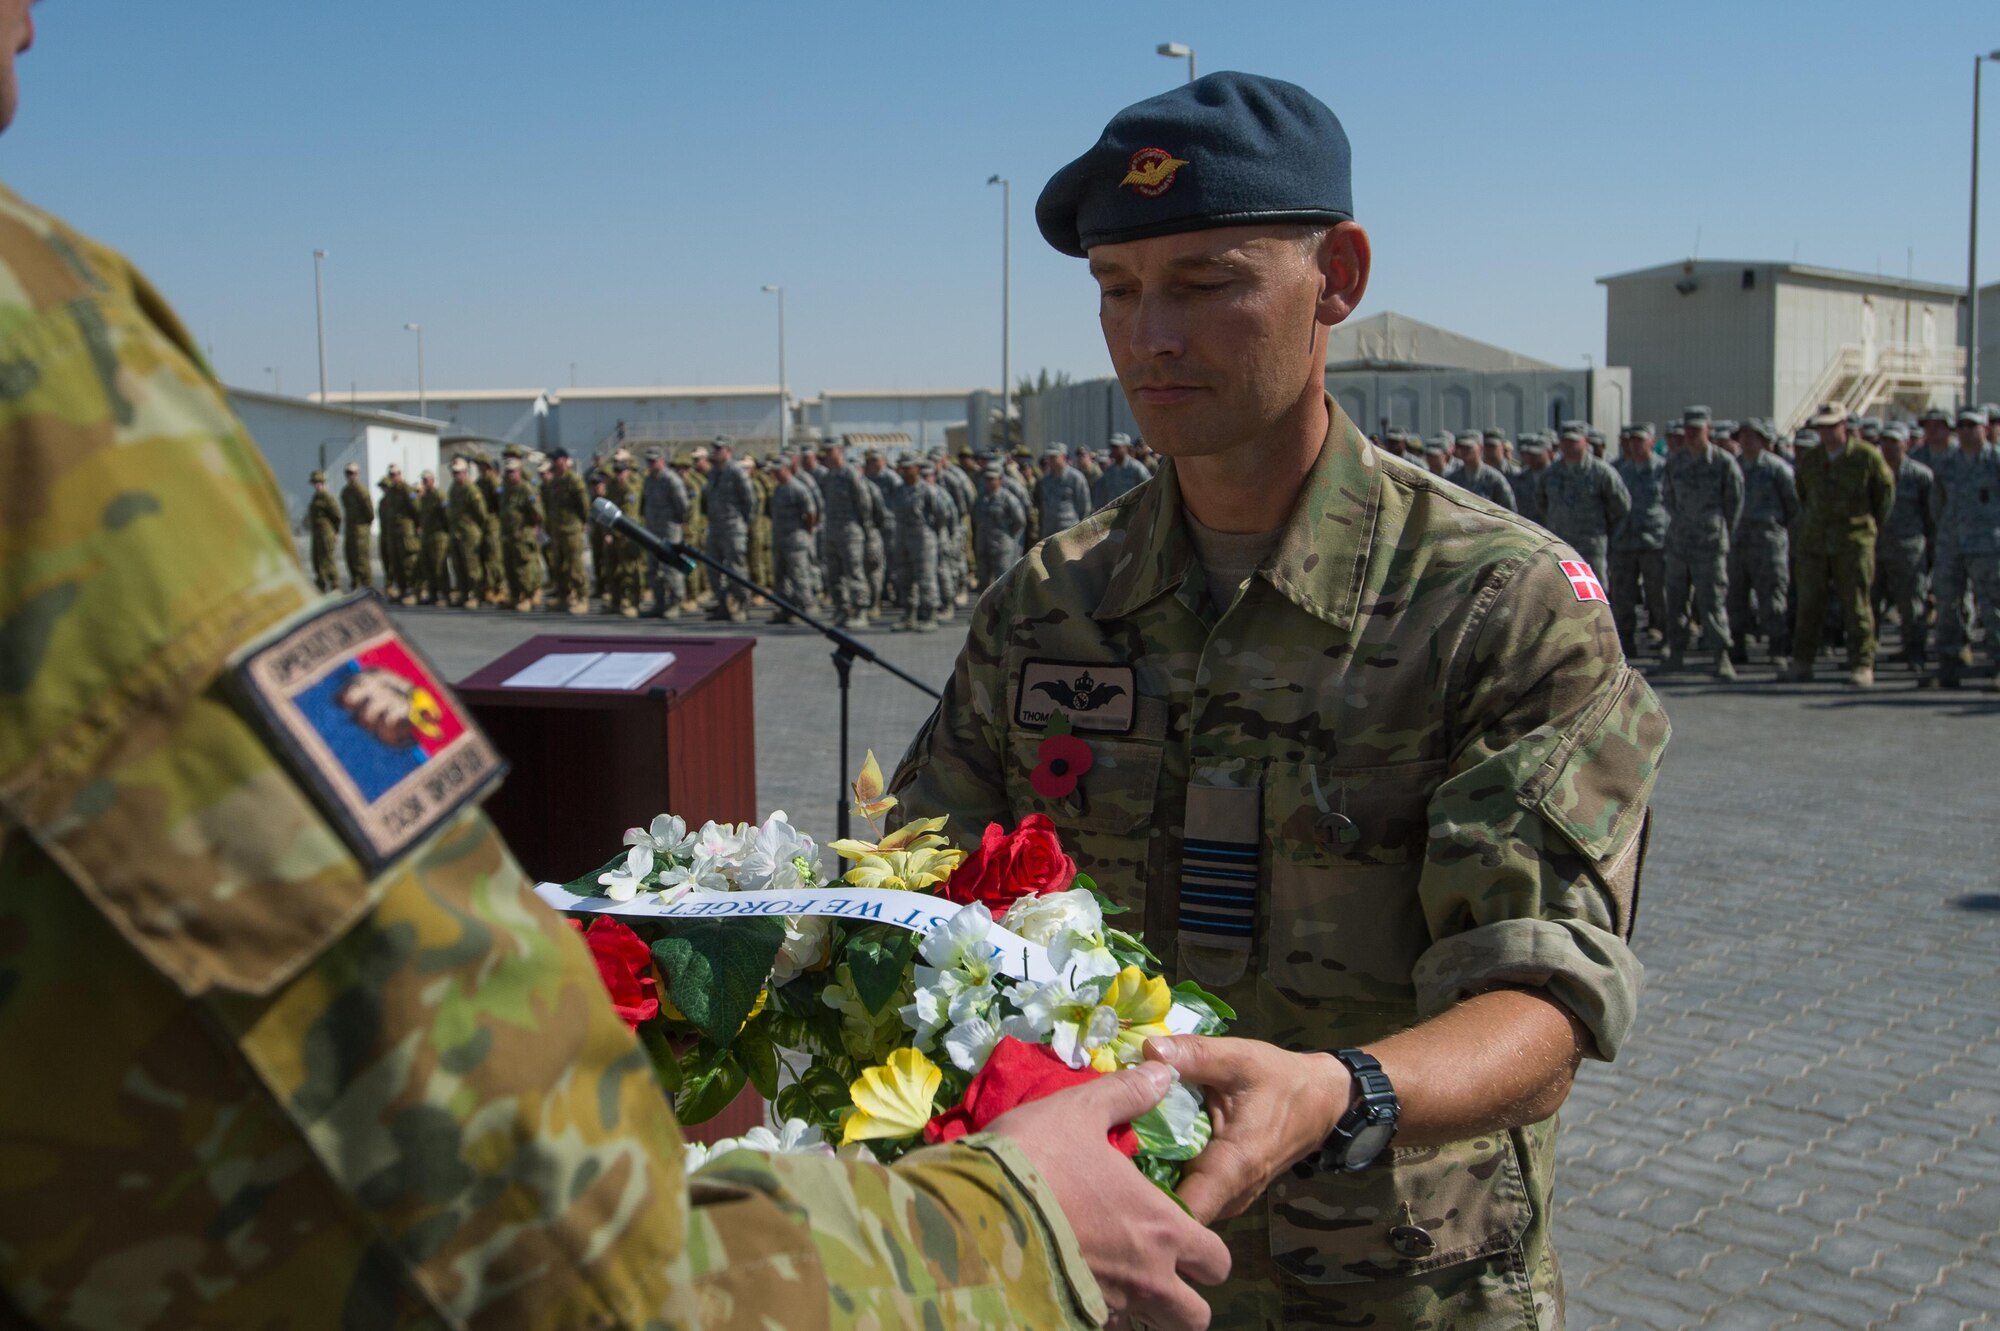 A deployed Royal Danish Air Force service member receives a wreath during a Coalition Veteran’s Day ceremony on Nov. 11, 2016 at an undisclosed location in Southwest Asia. The wreaths were placed at a nearby memorial in honor of fellow veterans. (U.S. Air Force photo by Senior Airman Tyler Woodward)